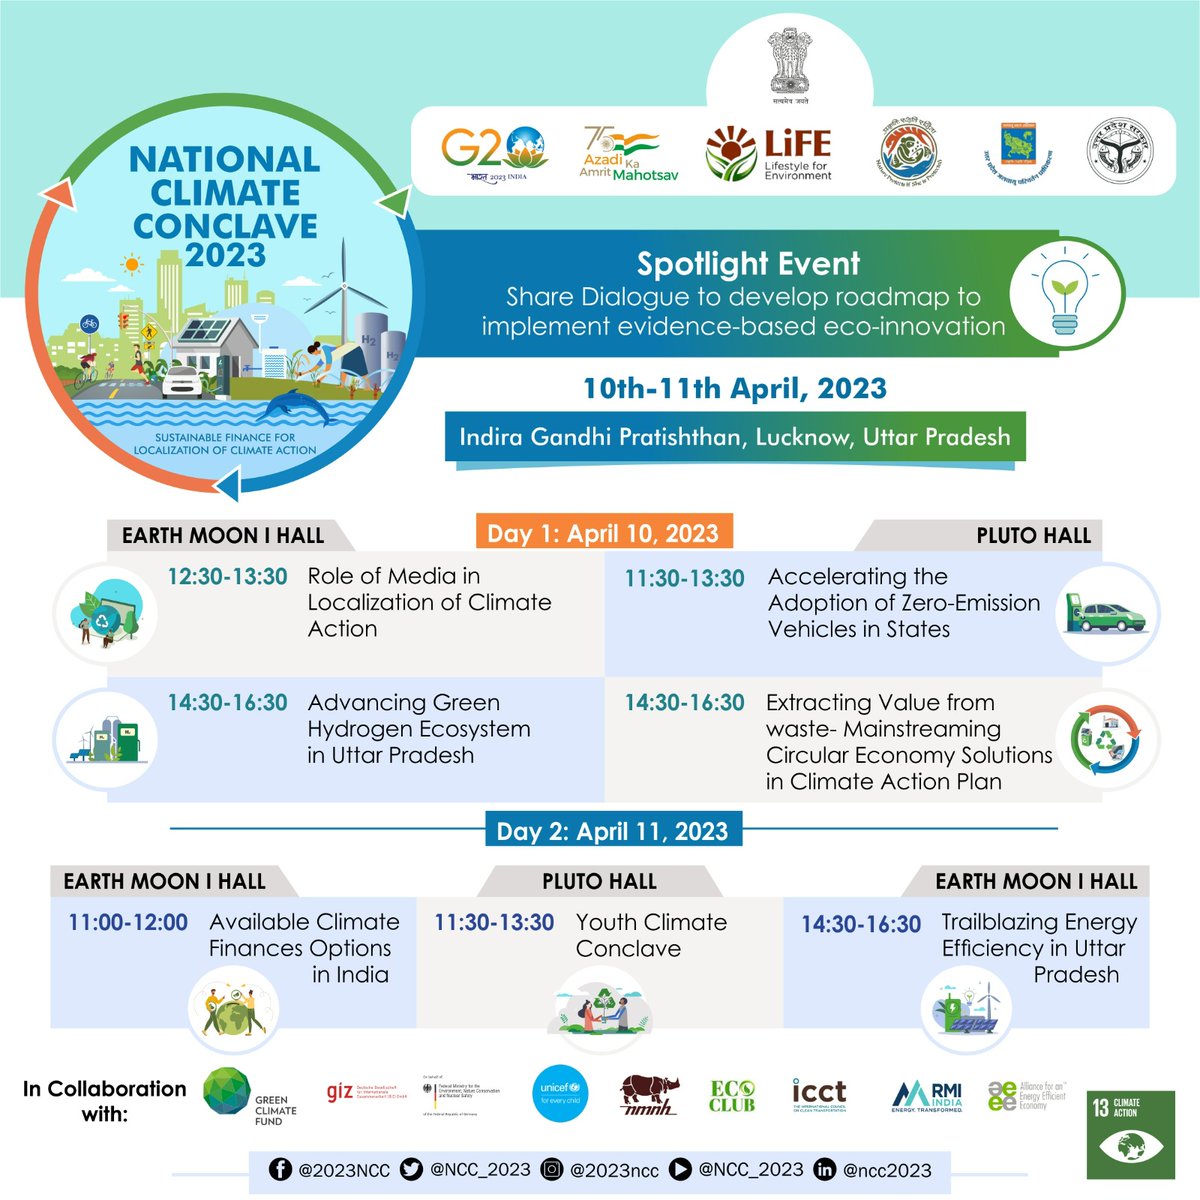 1/2) Join us for the intrusive Spotlight Event during the National Climate Conclave 2023, where we will exchange dilogue and knowledge to create policies and roadmap for implementing evidence-based local climate action and enhancing sustainable practises for a better tomorrow...